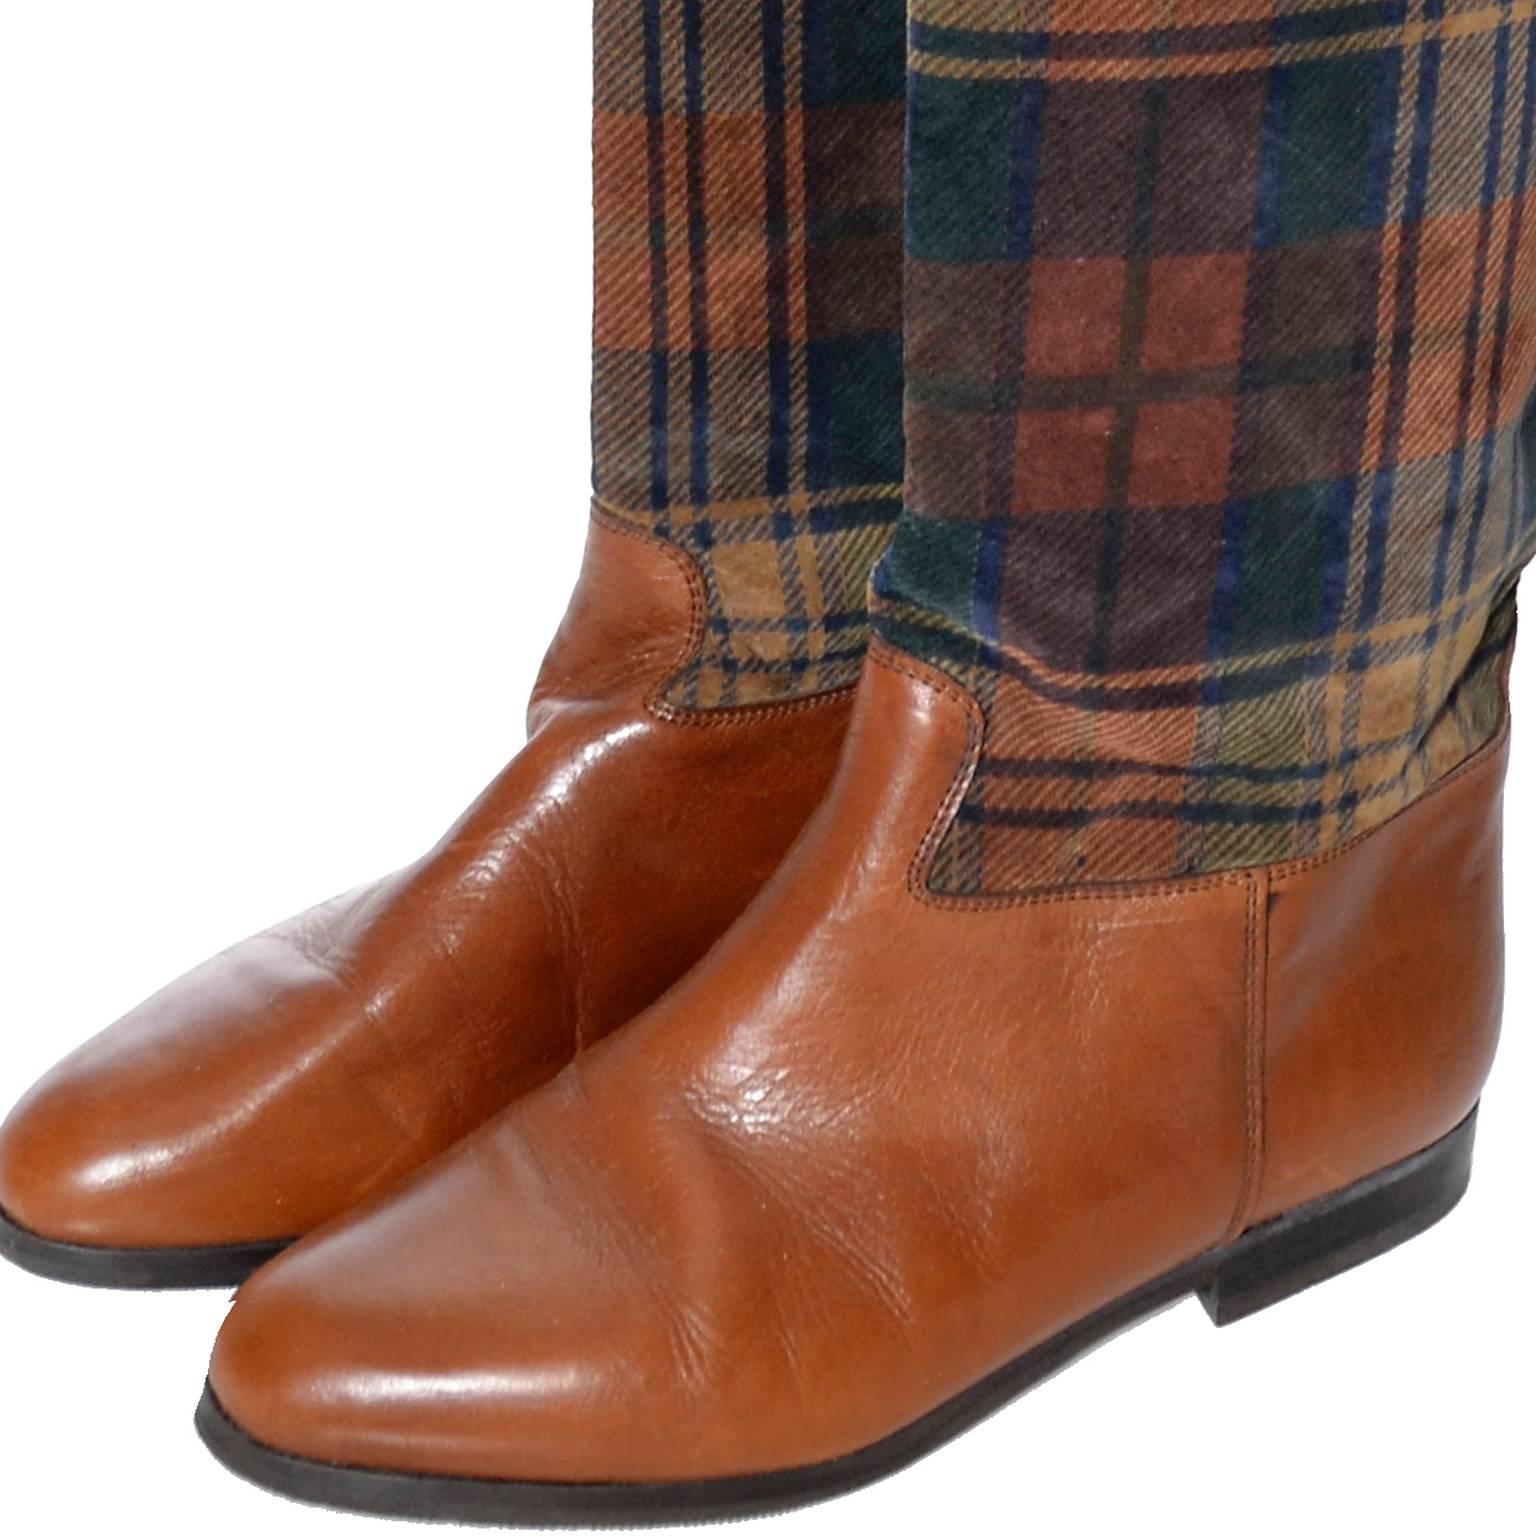 These vintage boots are so fabulous! They are from Saks Fifth Avenue and are made of a caramel leather and a soft, plush plaid fabric that is also lined in leather.  These boots appear to have been worn only once and are labeled a size 9B. The other